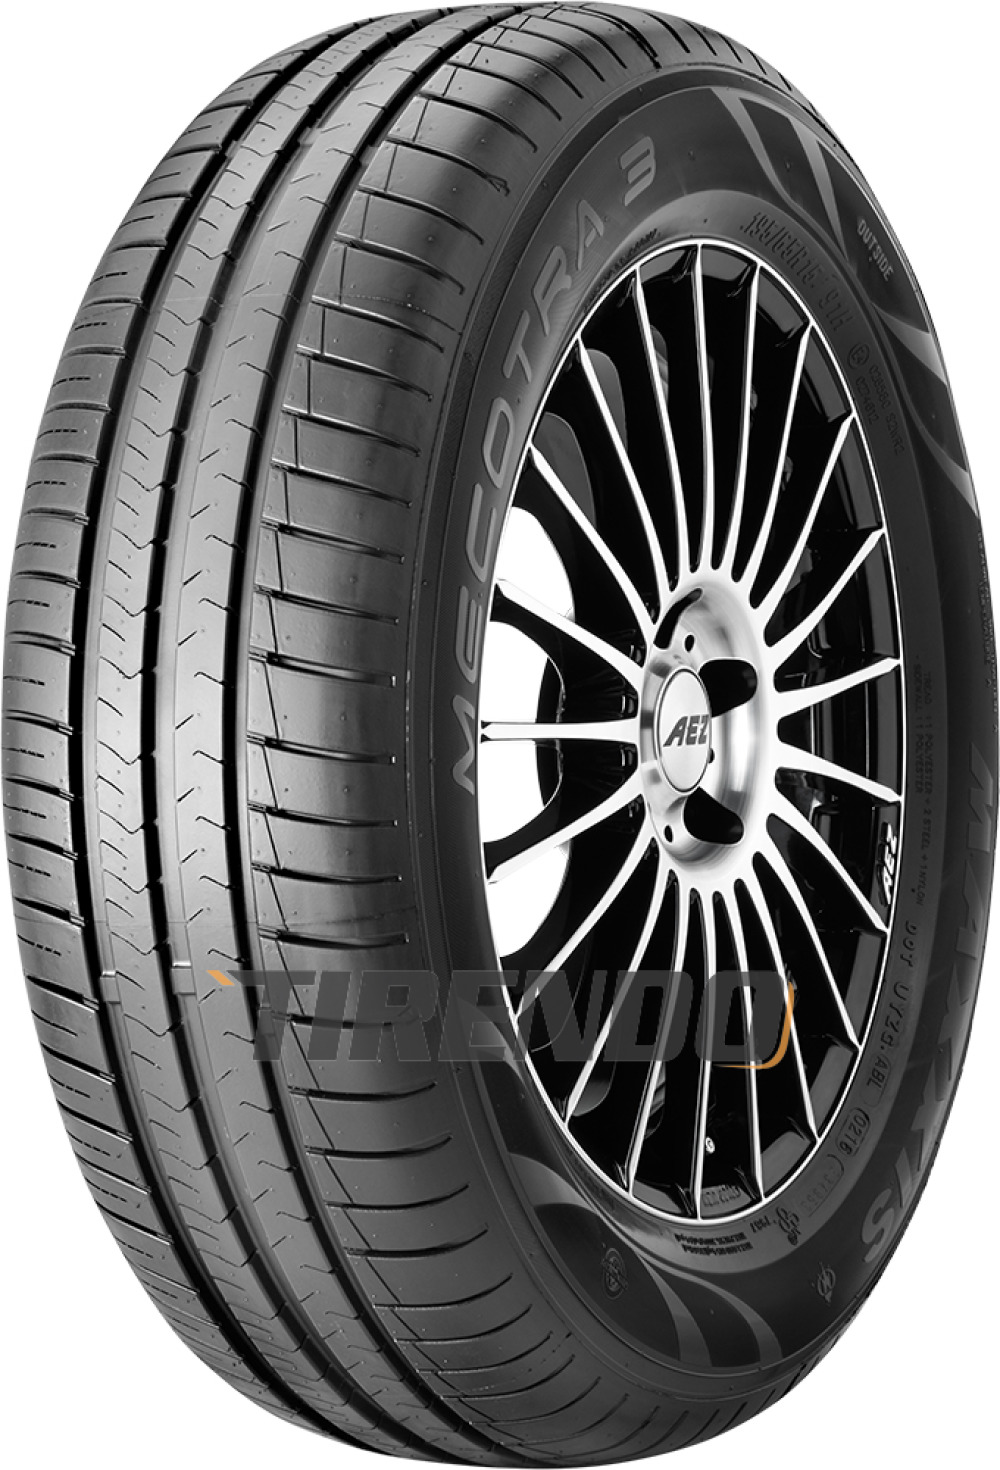 Maxxis Mecotra 3 ( 155/65 R14 75T ) von Maxxis